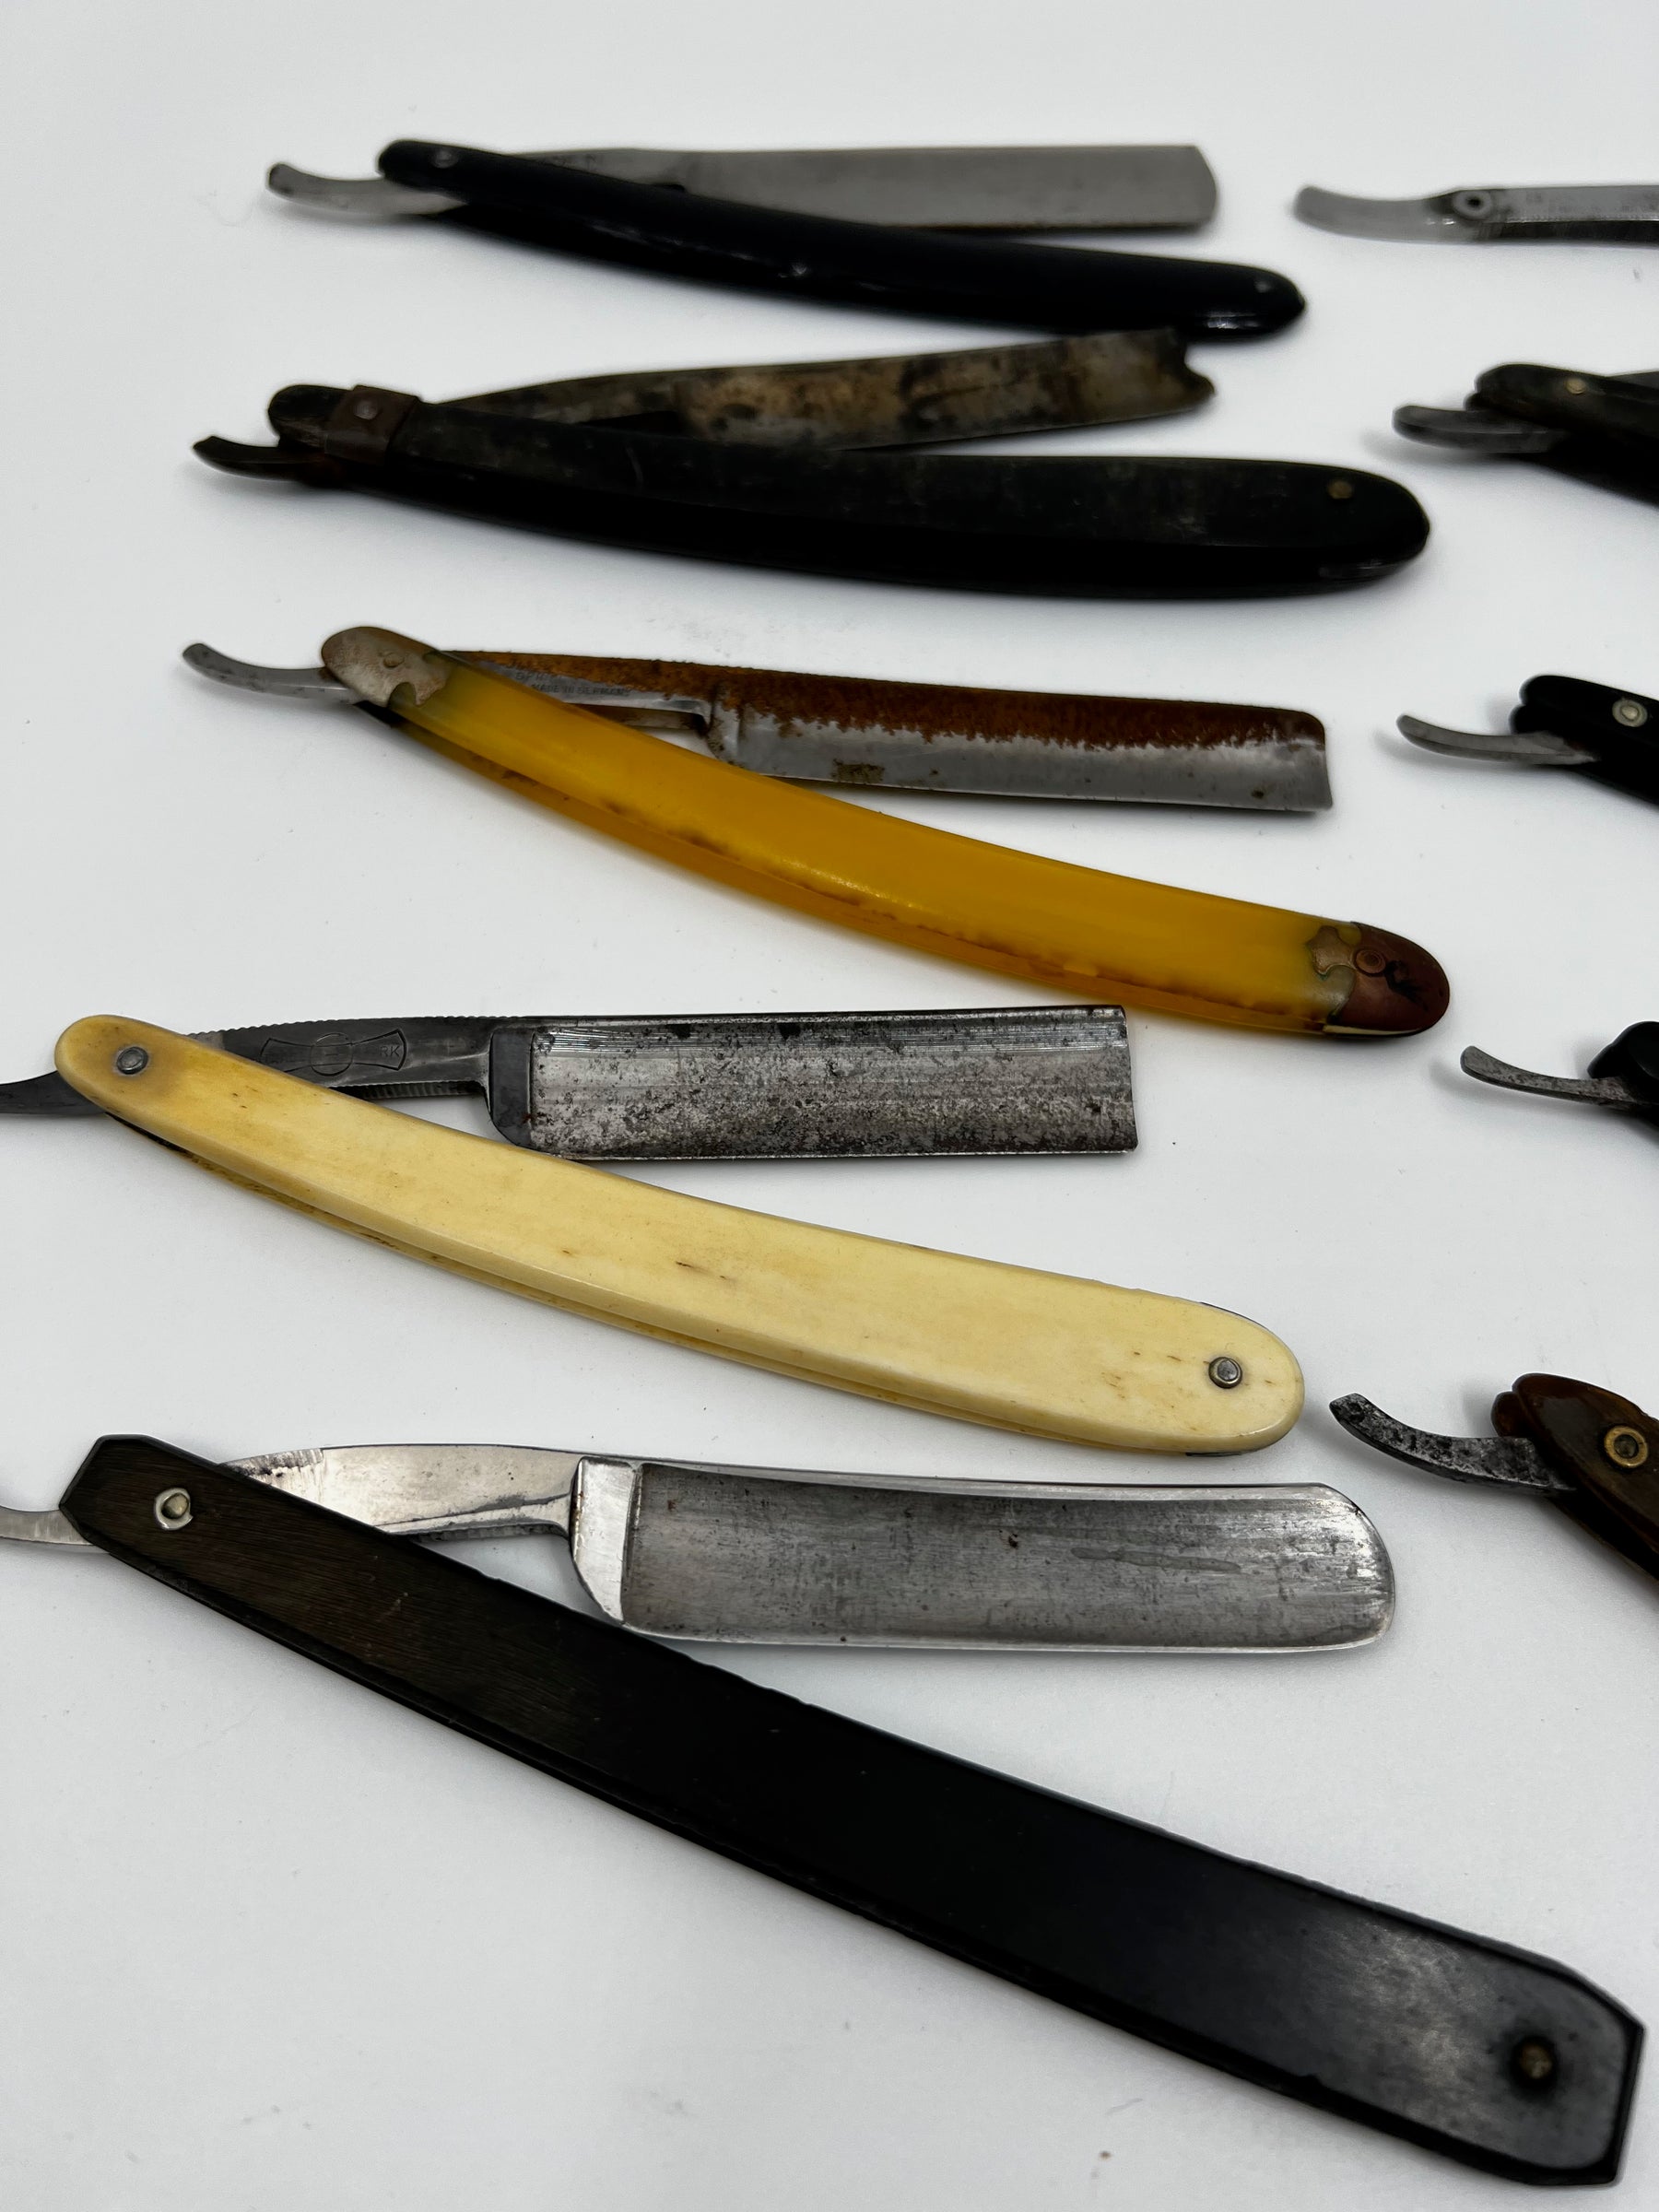 Vintage 10 Straight Razor Lot #9 - May Contain Sheffield, Solingen, Japanese & USA makers, as pictured